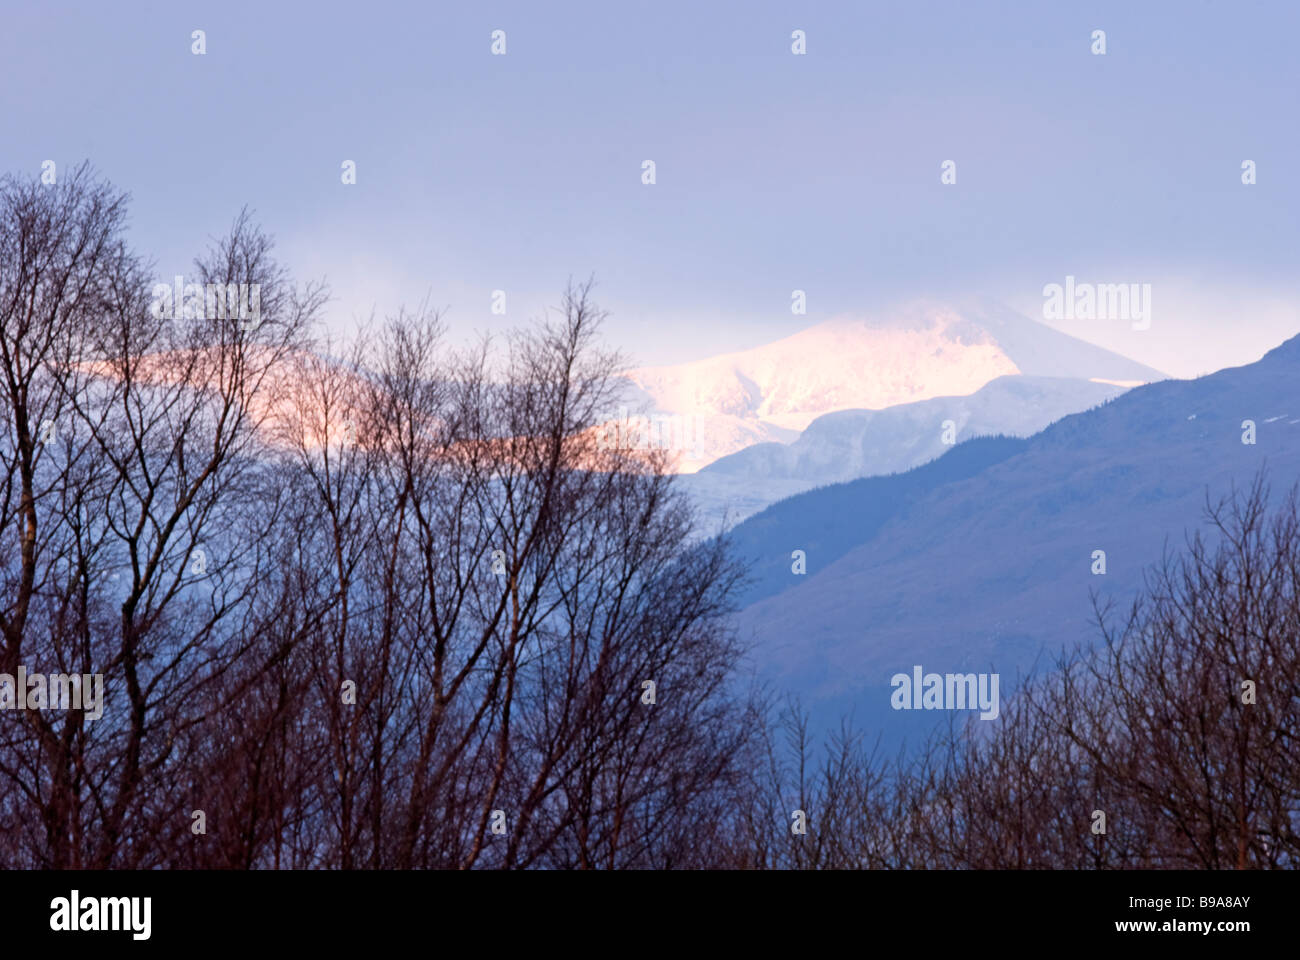 Beinn a Chroin, a Munro in the Scottish Highlands, on a winters morning Stock Photo